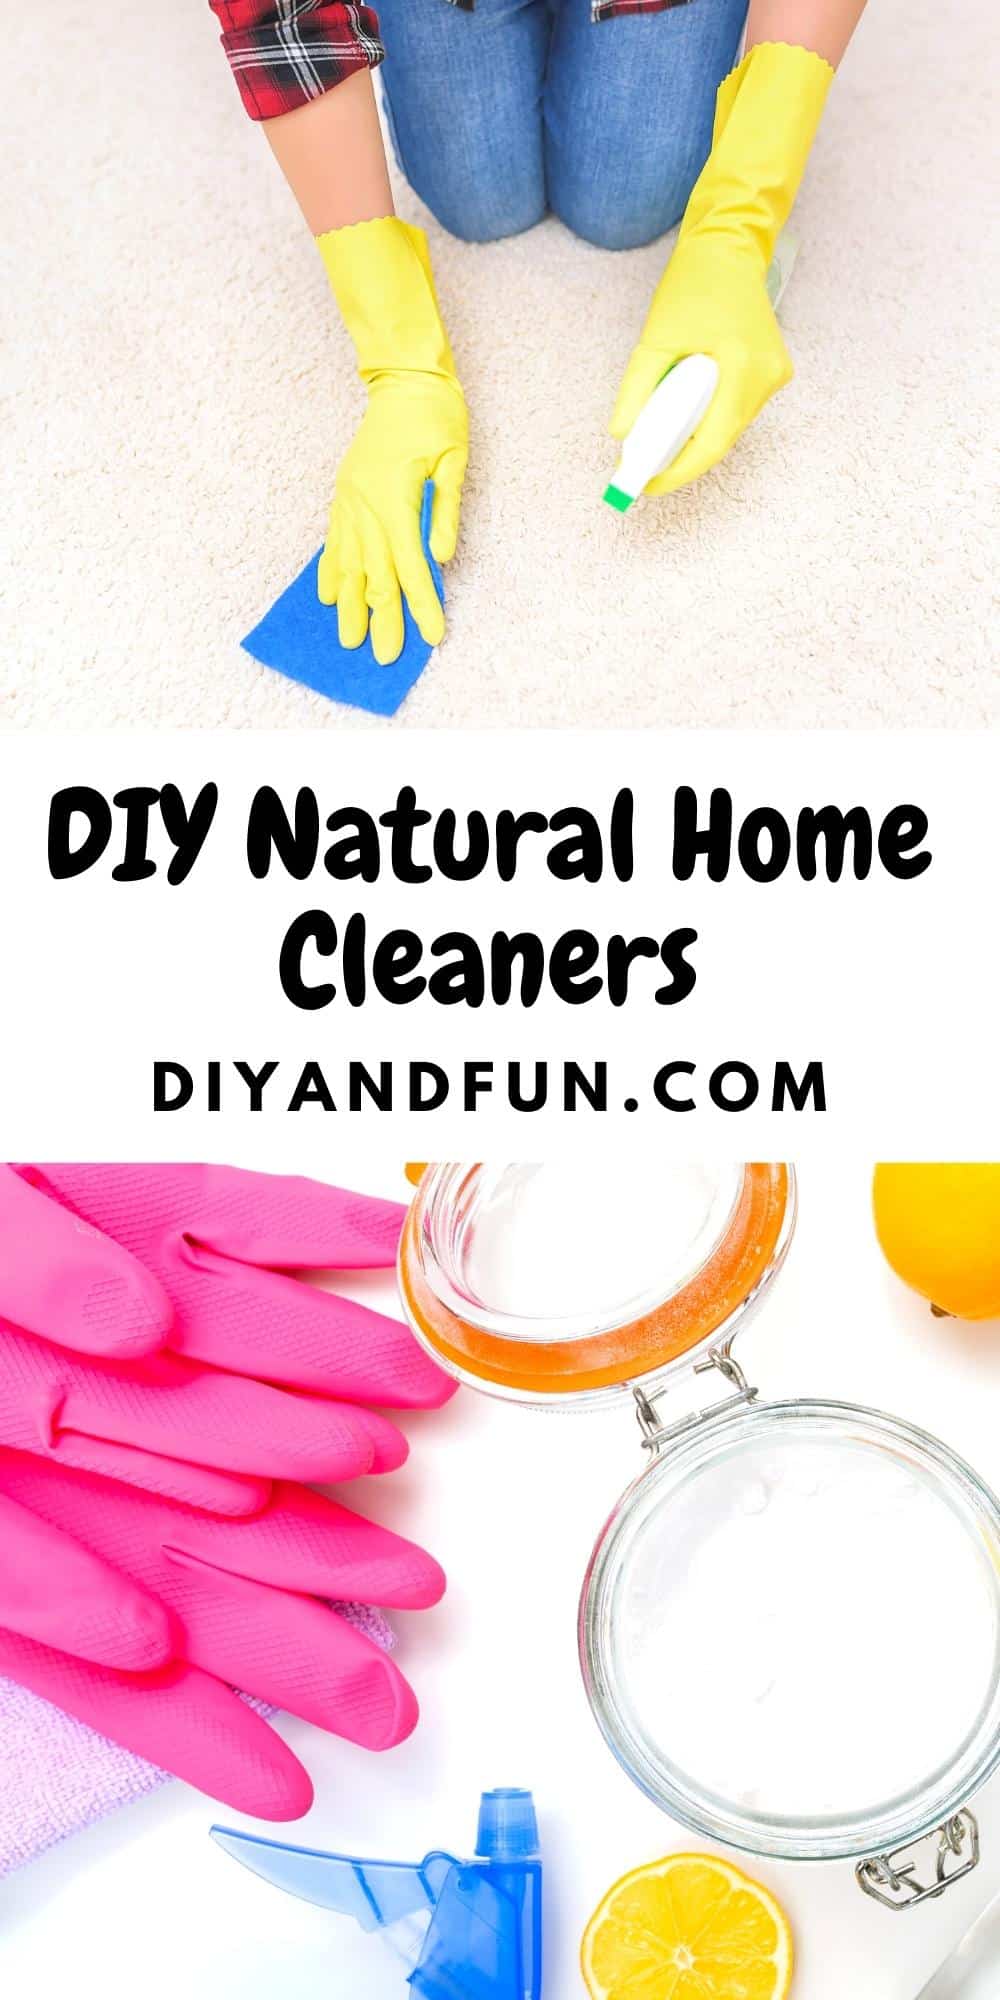 DIY Natural Home Cleaners, how to clean your home using natural ingredients rather than ingredients that may not be beneficial.